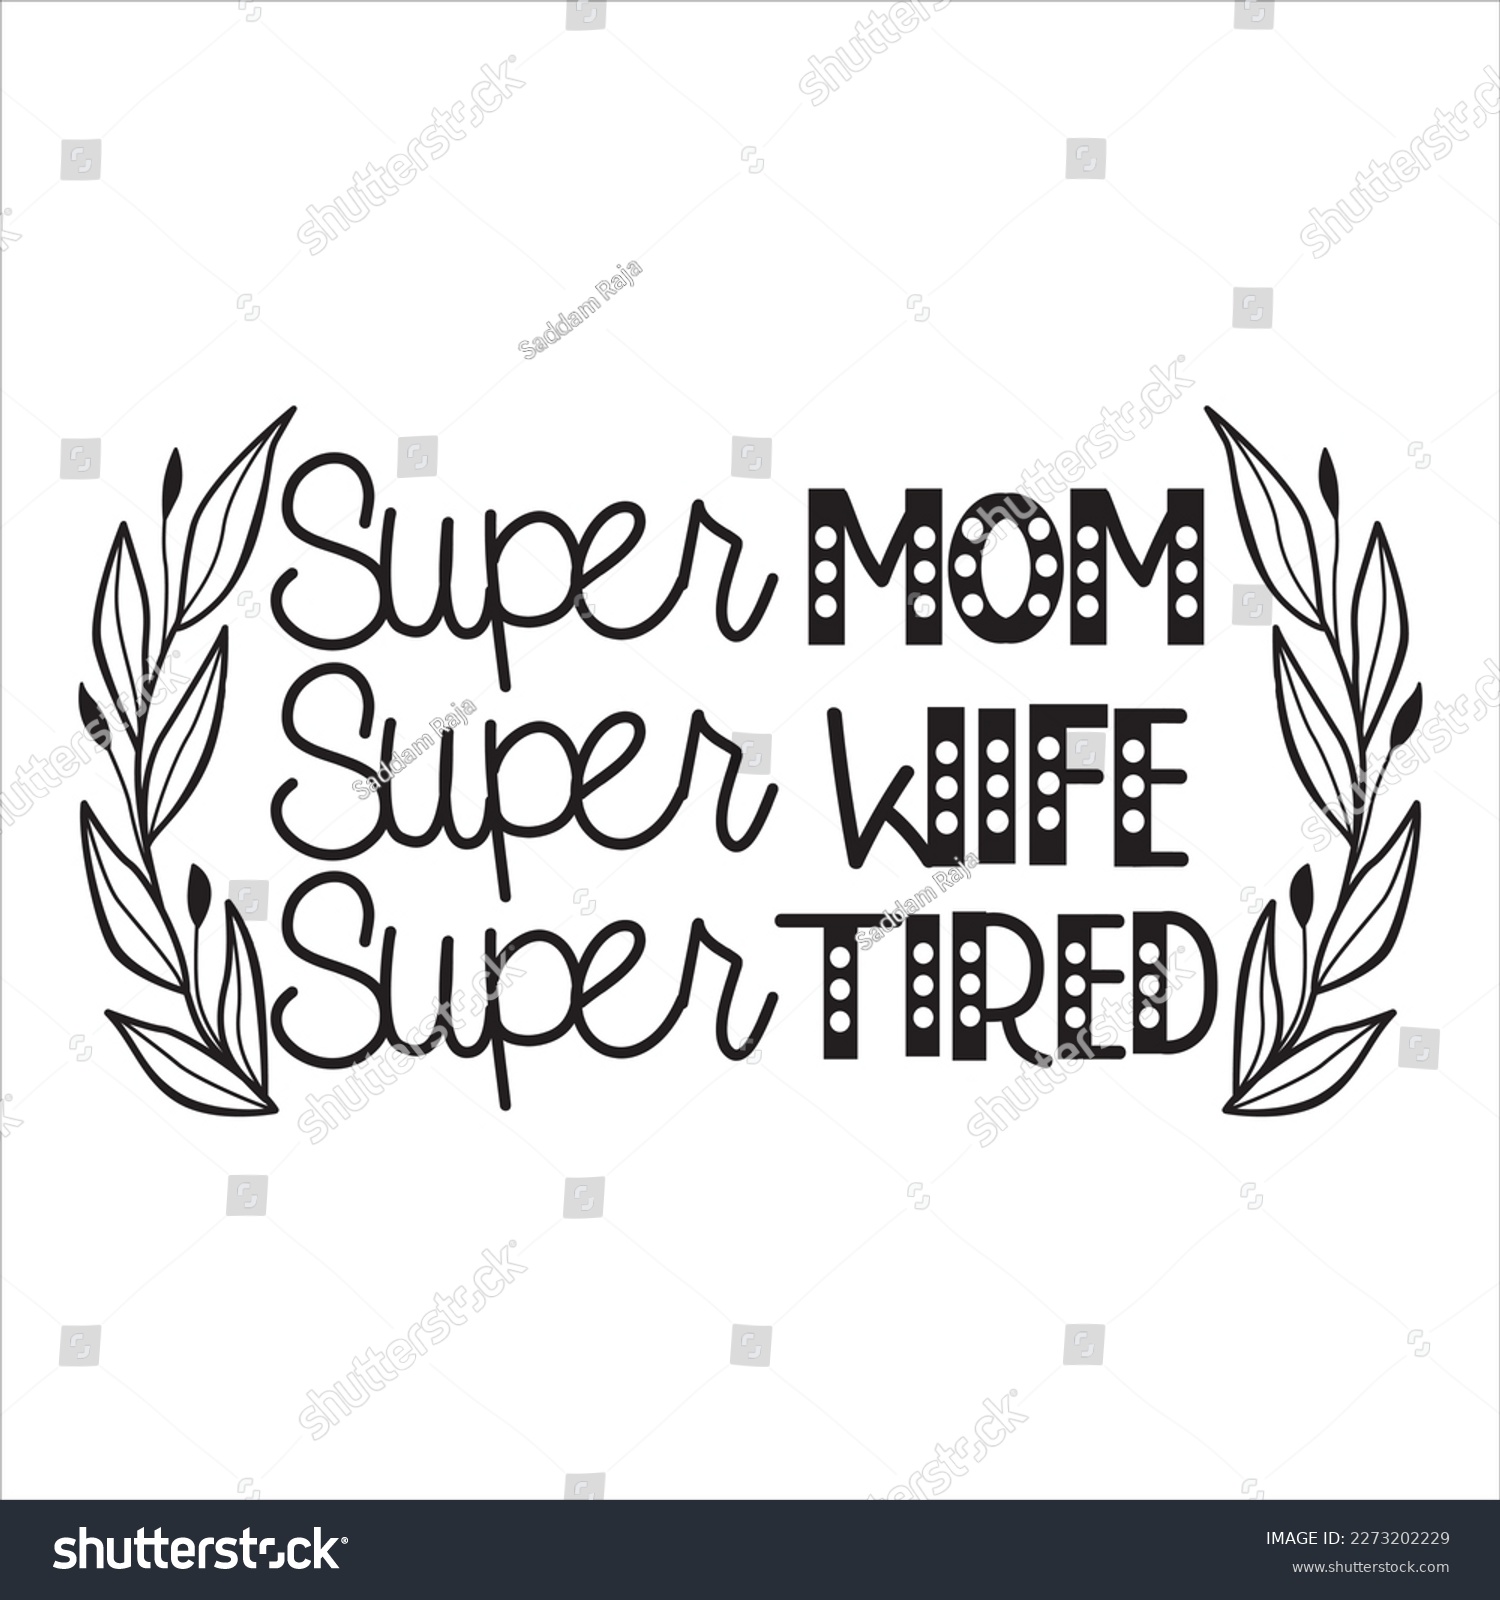 SVG of Super Mom Super Wife Super Mom Super Tired - Mother’s Day T shirt Design, svg files for Cutting, bag, cups, card, prints and posters svg